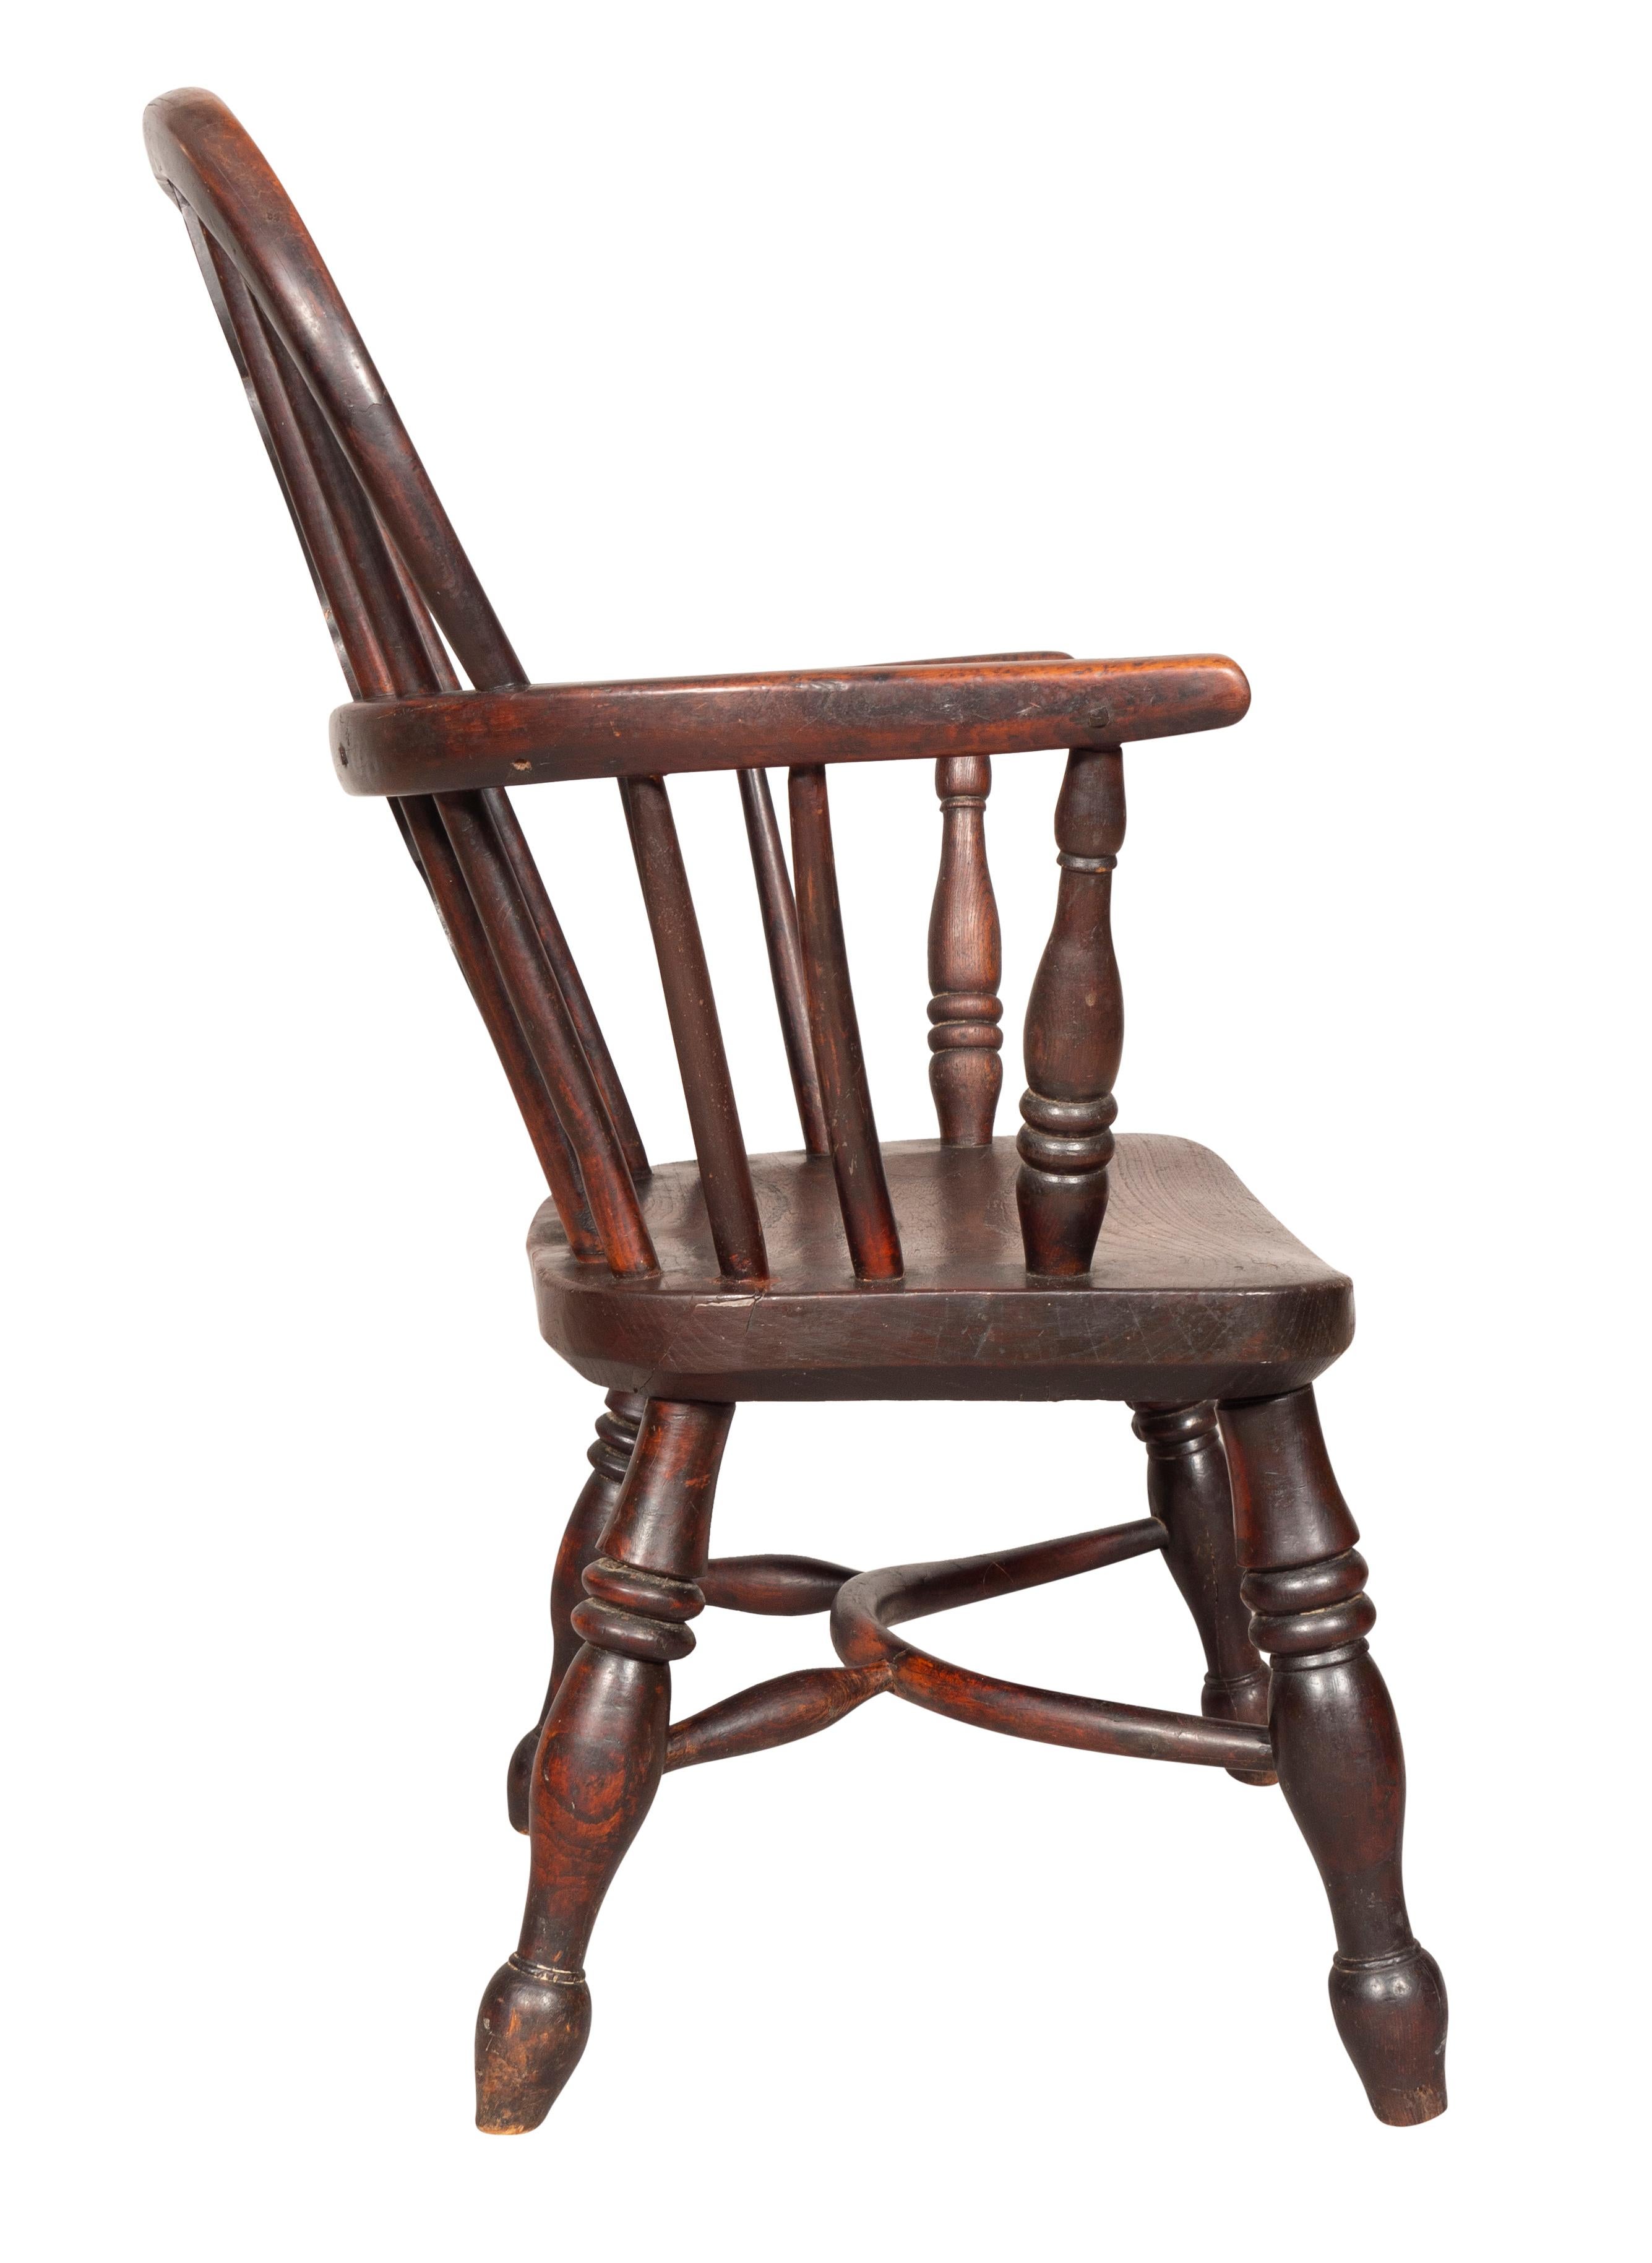 Late Regency Childs Yew and Elm Windsor Armchair In Good Condition For Sale In Essex, MA